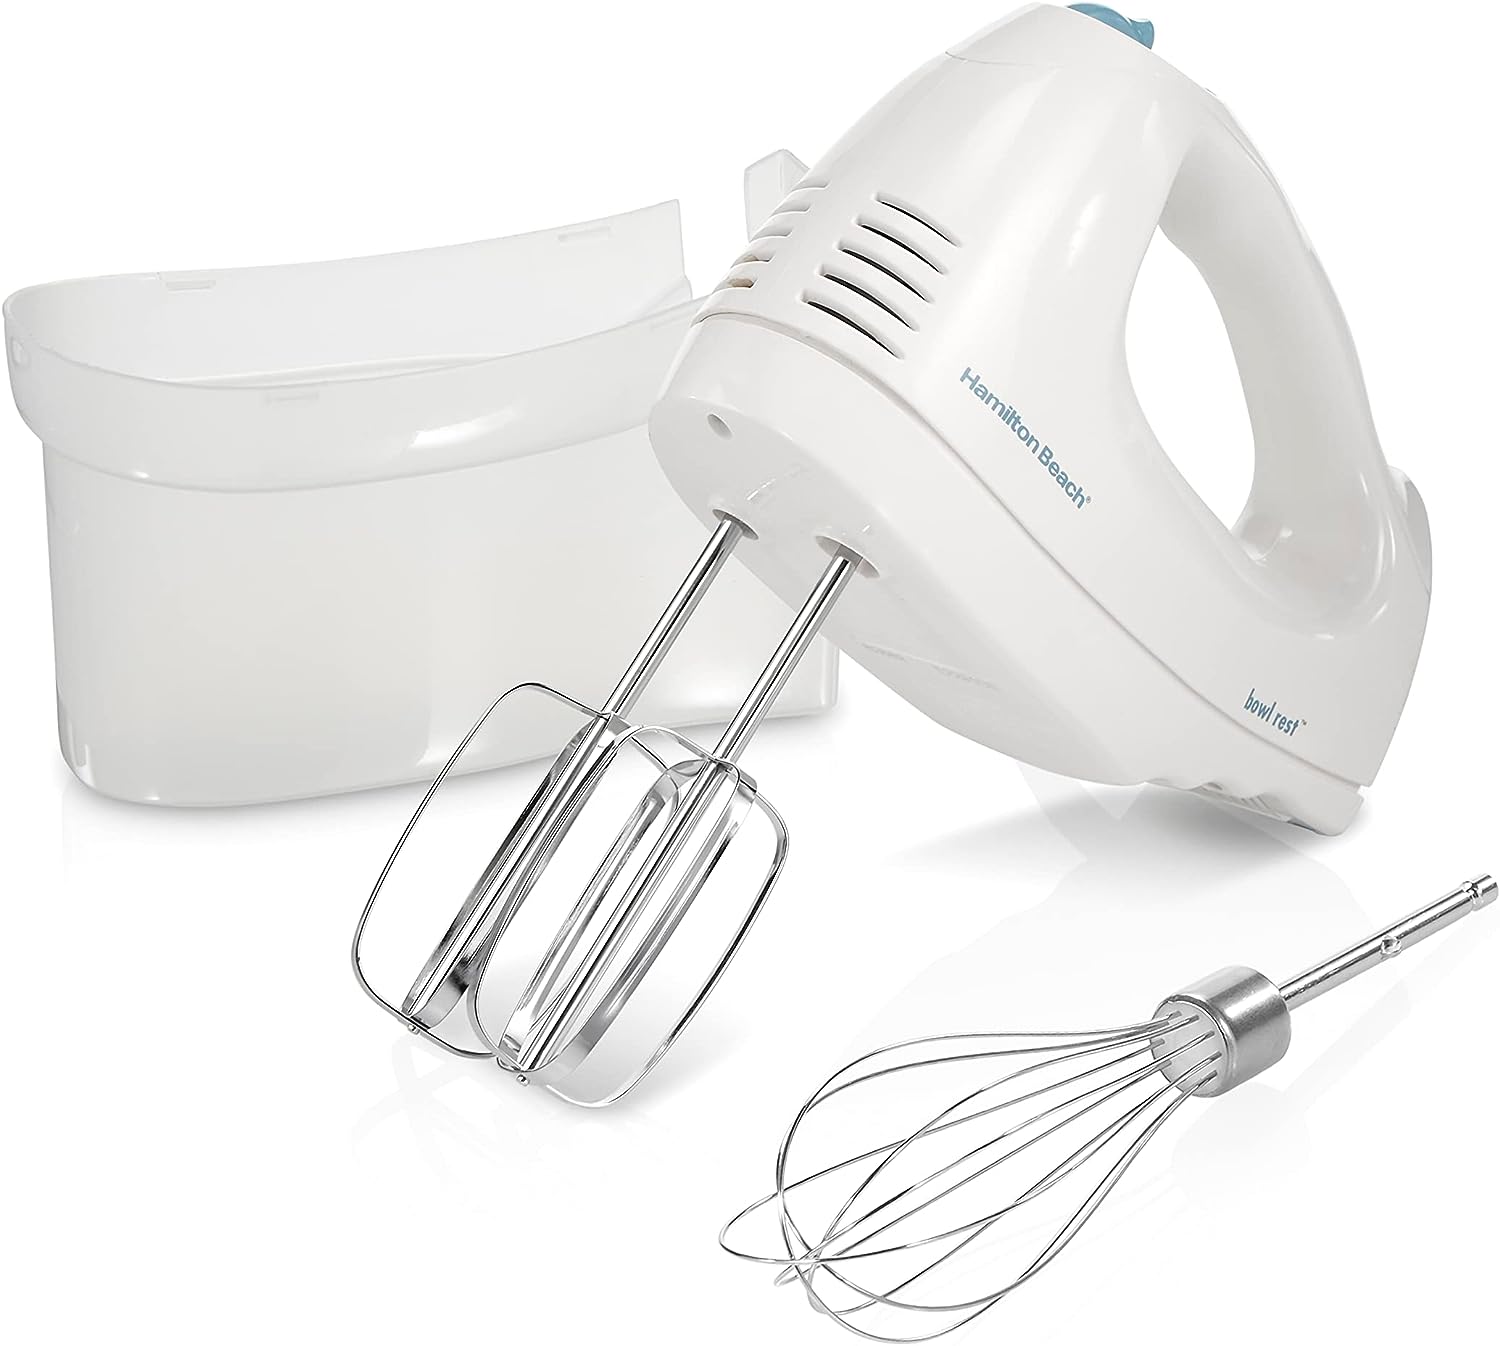 Hamilton Beach 6-Speed Electric Hand Mixer with Whisk